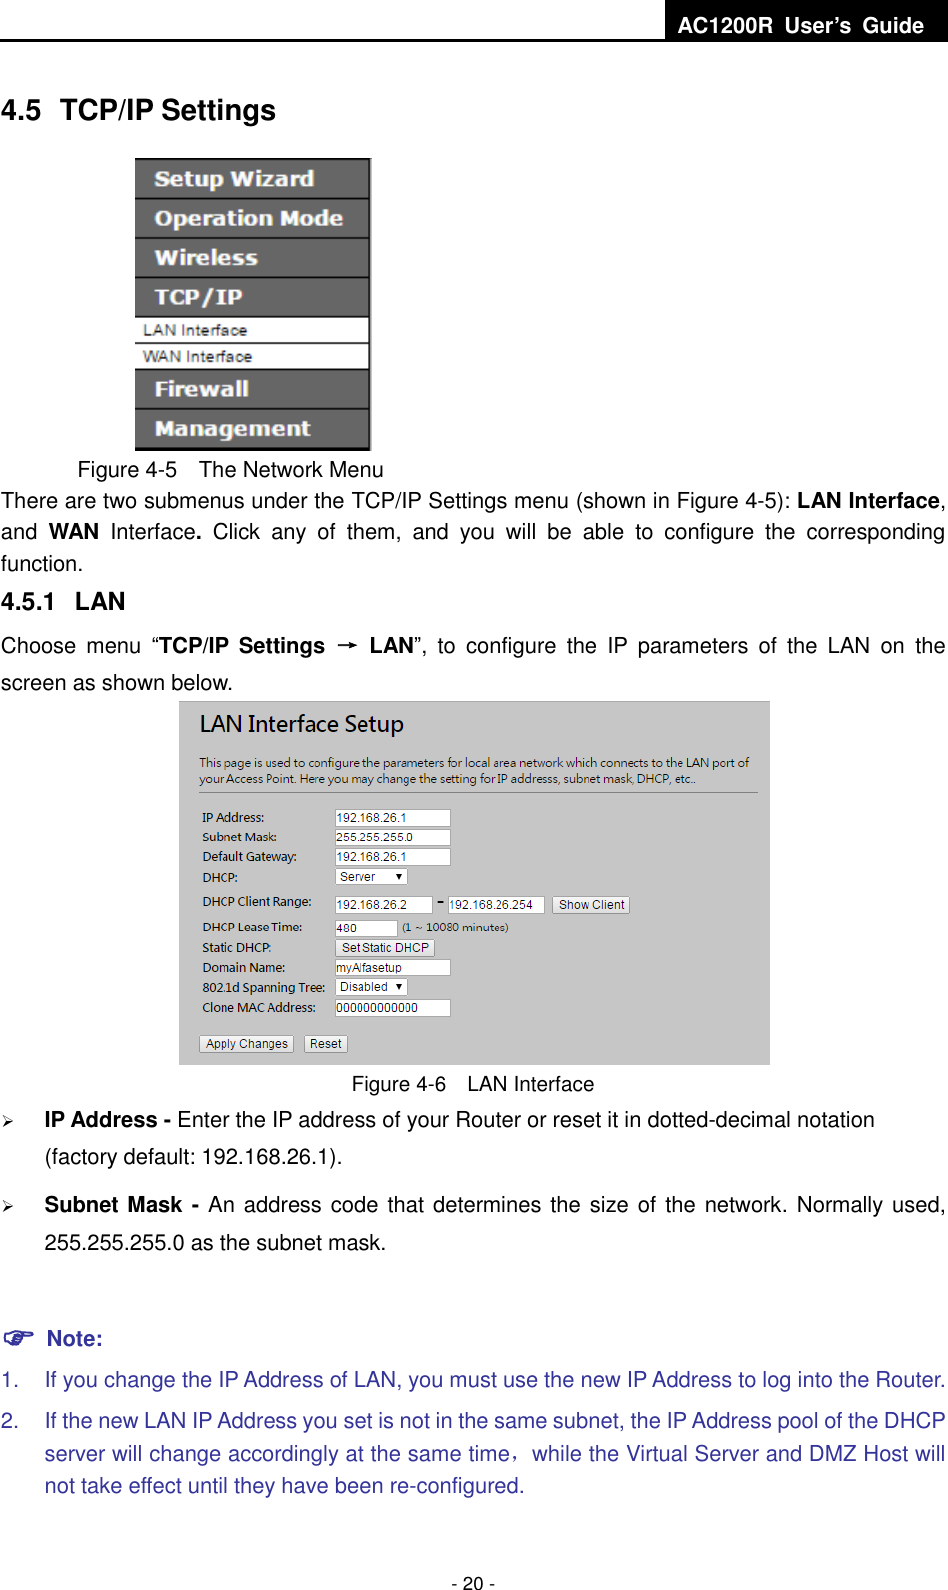  AC1200R  User’s  Guide  - 20 - 4.5  TCP/IP Settings  Figure 4-5  The Network Menu There are two submenus under the TCP/IP Settings menu (shown in Figure 4-5): LAN Interface, and  WAN  Interface.  Click  any  of  them,  and  you  will  be  able  to  configure  the  corresponding function.   4.5.1  LAN Choose  menu  “TCP/IP Settings  →  LAN”,  to  configure  the  IP  parameters  of  the  LAN  on  the screen as shown below.  Figure 4-6  LAN Interface  IP Address - Enter the IP address of your Router or reset it in dotted-decimal notation (factory default: 192.168.26.1).  Subnet Mask - An address code that determines the size of the network. Normally used, 255.255.255.0 as the subnet mask.     Note: 1.  If you change the IP Address of LAN, you must use the new IP Address to log into the Router.   2.  If the new LAN IP Address you set is not in the same subnet, the IP Address pool of the DHCP server will change accordingly at the same time，while the Virtual Server and DMZ Host will not take effect until they have been re-configured. 